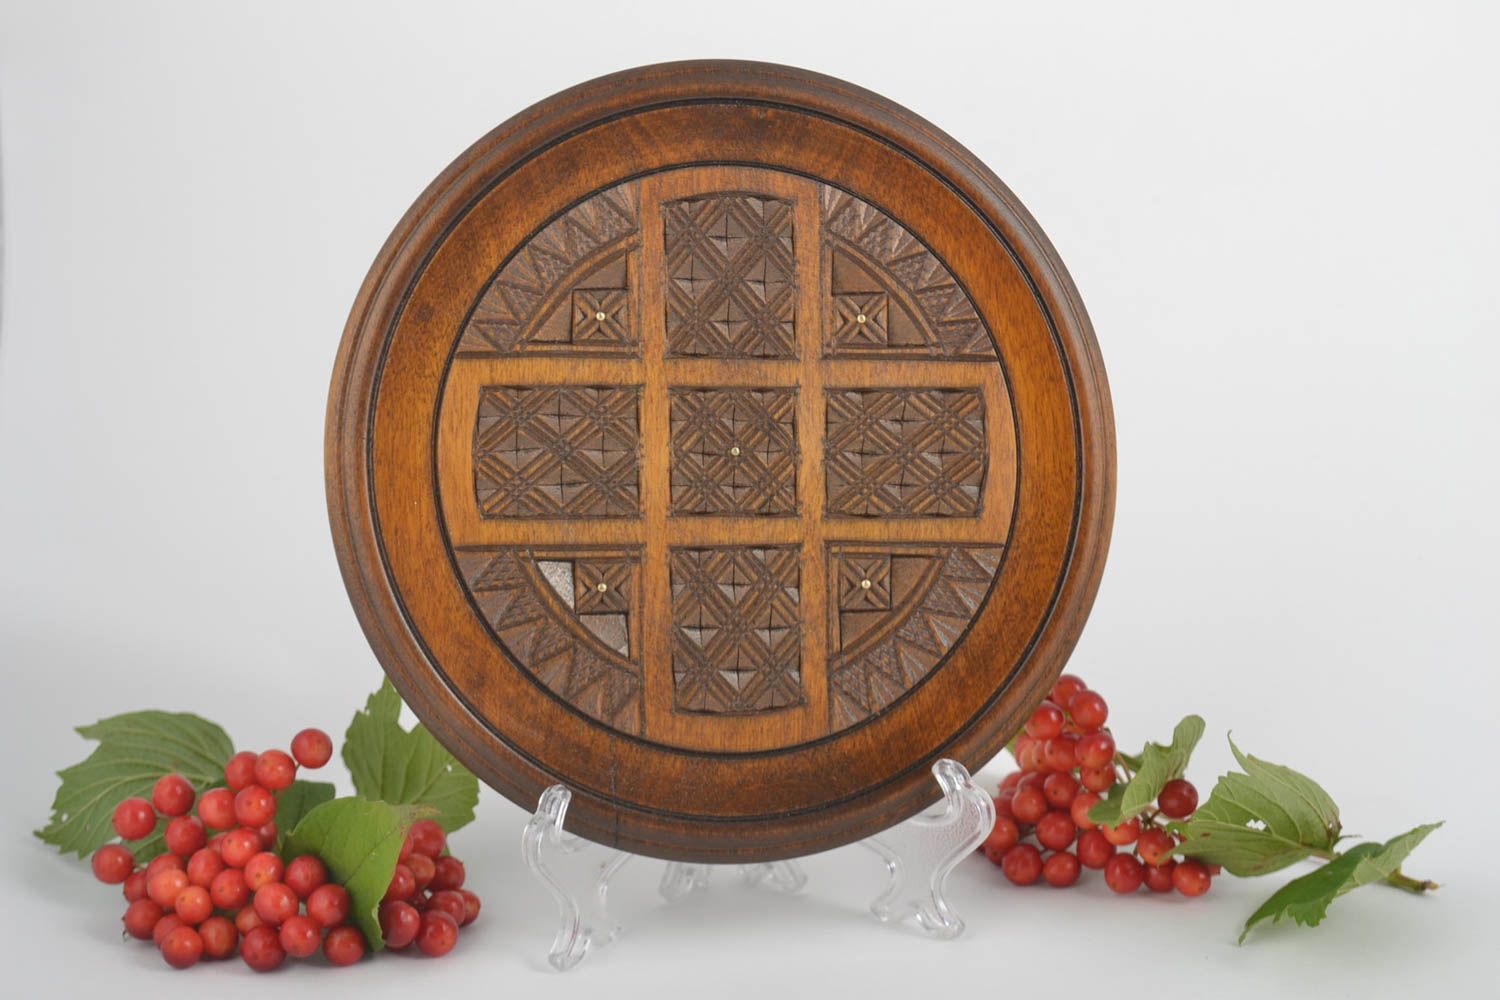 Handmade wall plate decorative plate wood gifts wall hanging rustic home decor  photo 1